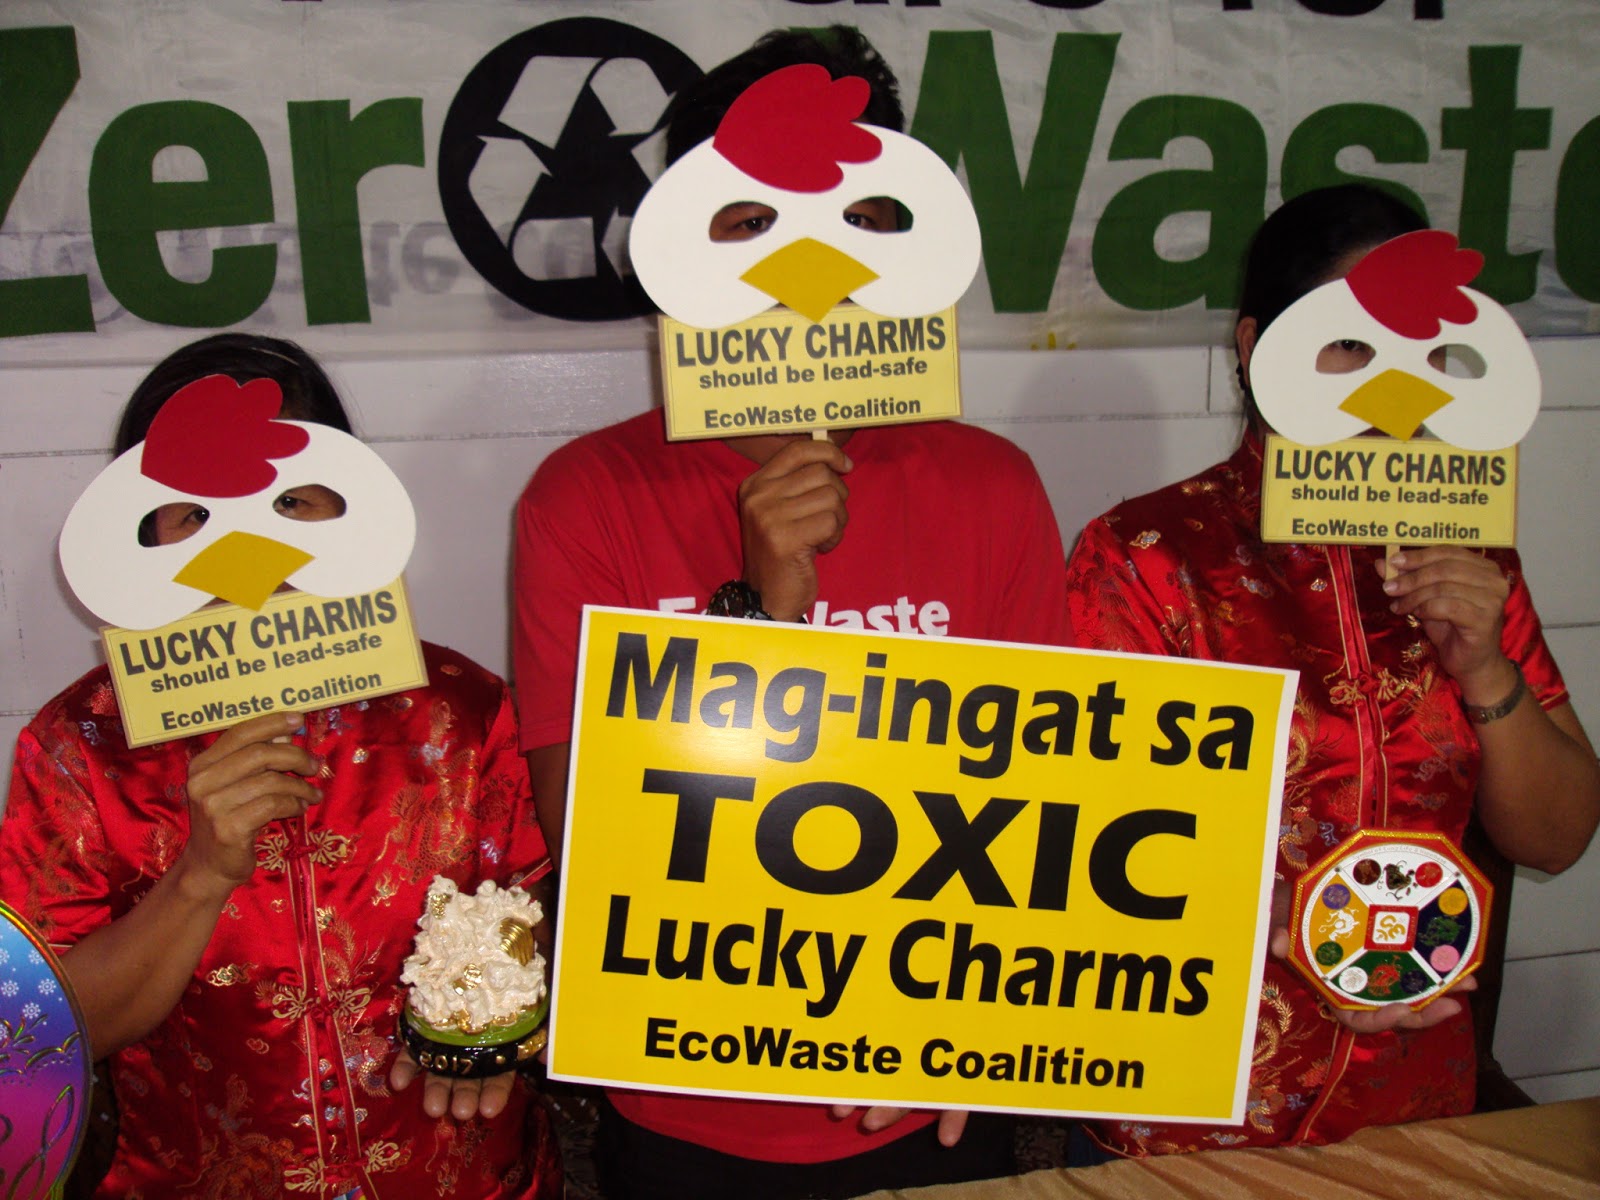 EcoWaste Coalition: Beware of Toxic Feng Shui Lucky Charms and Amulets